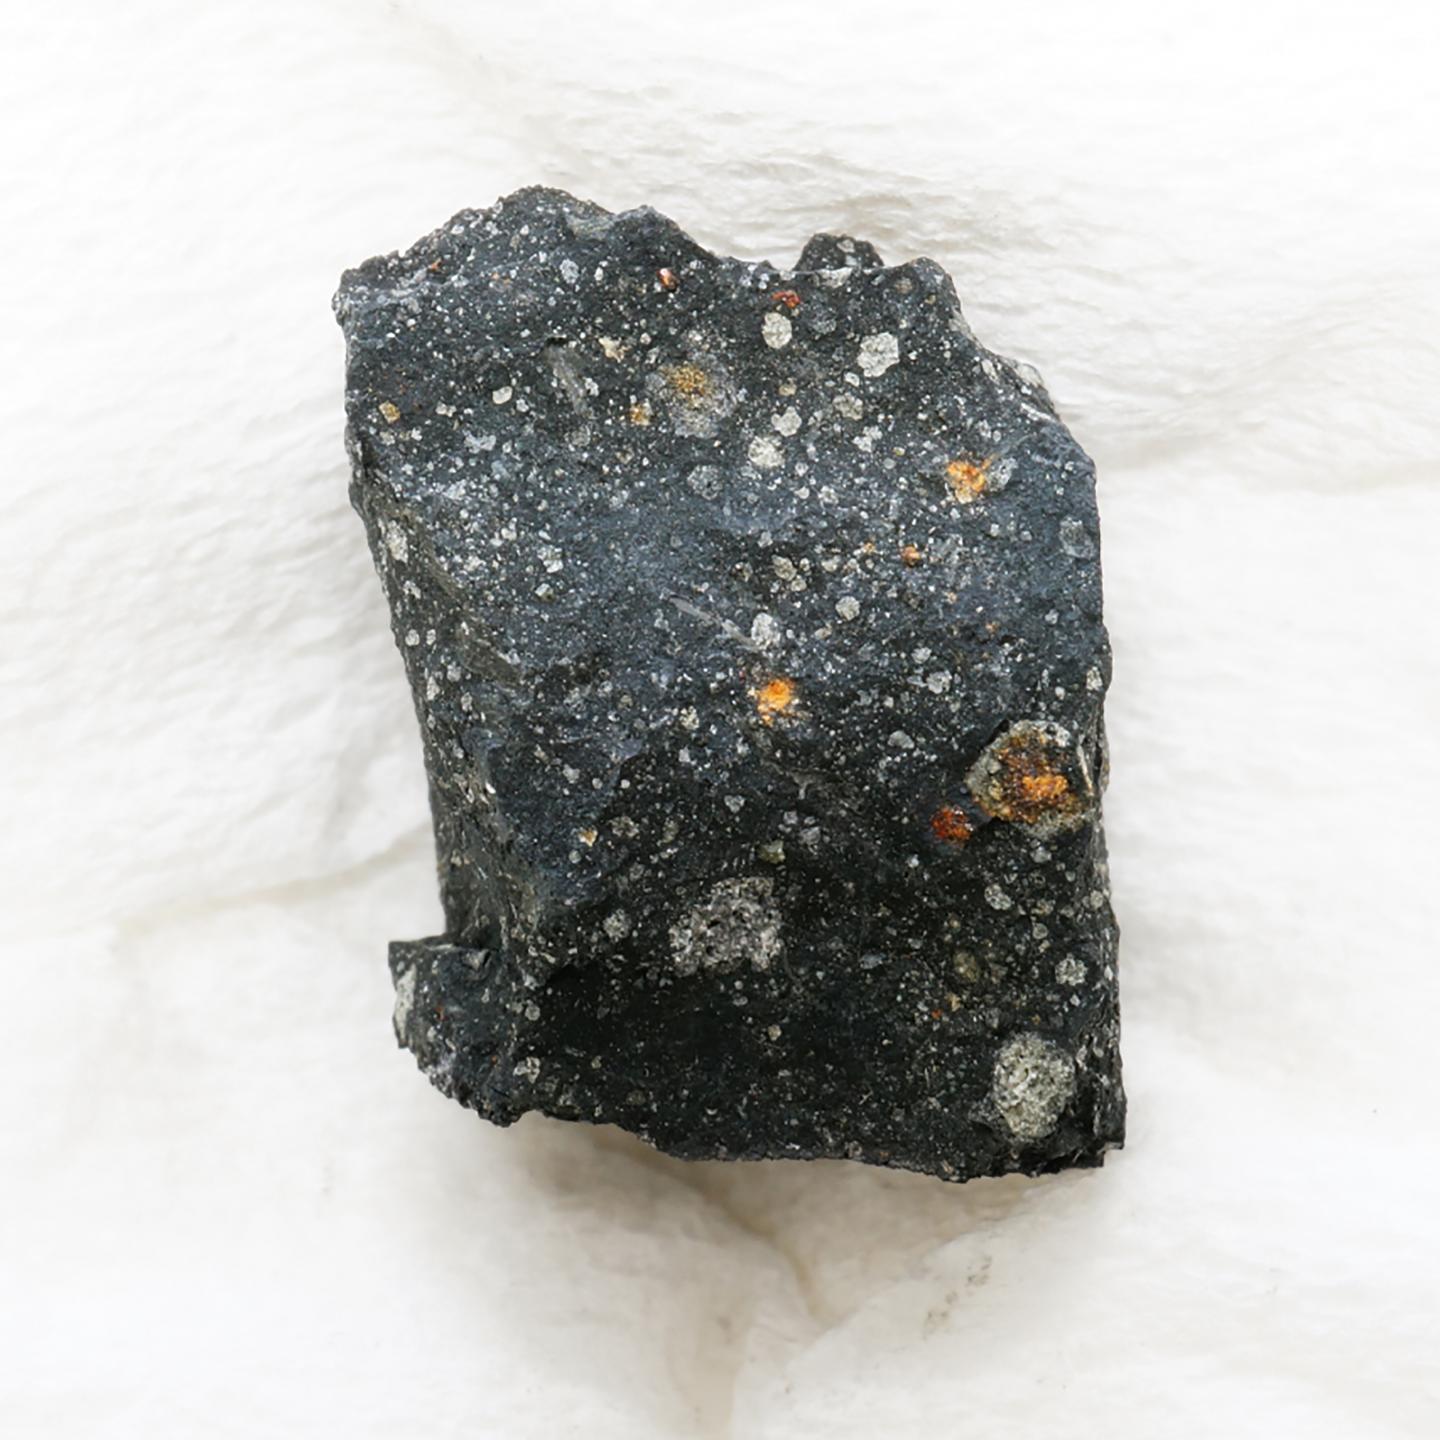 A Fragment of the Murchison Meteorite